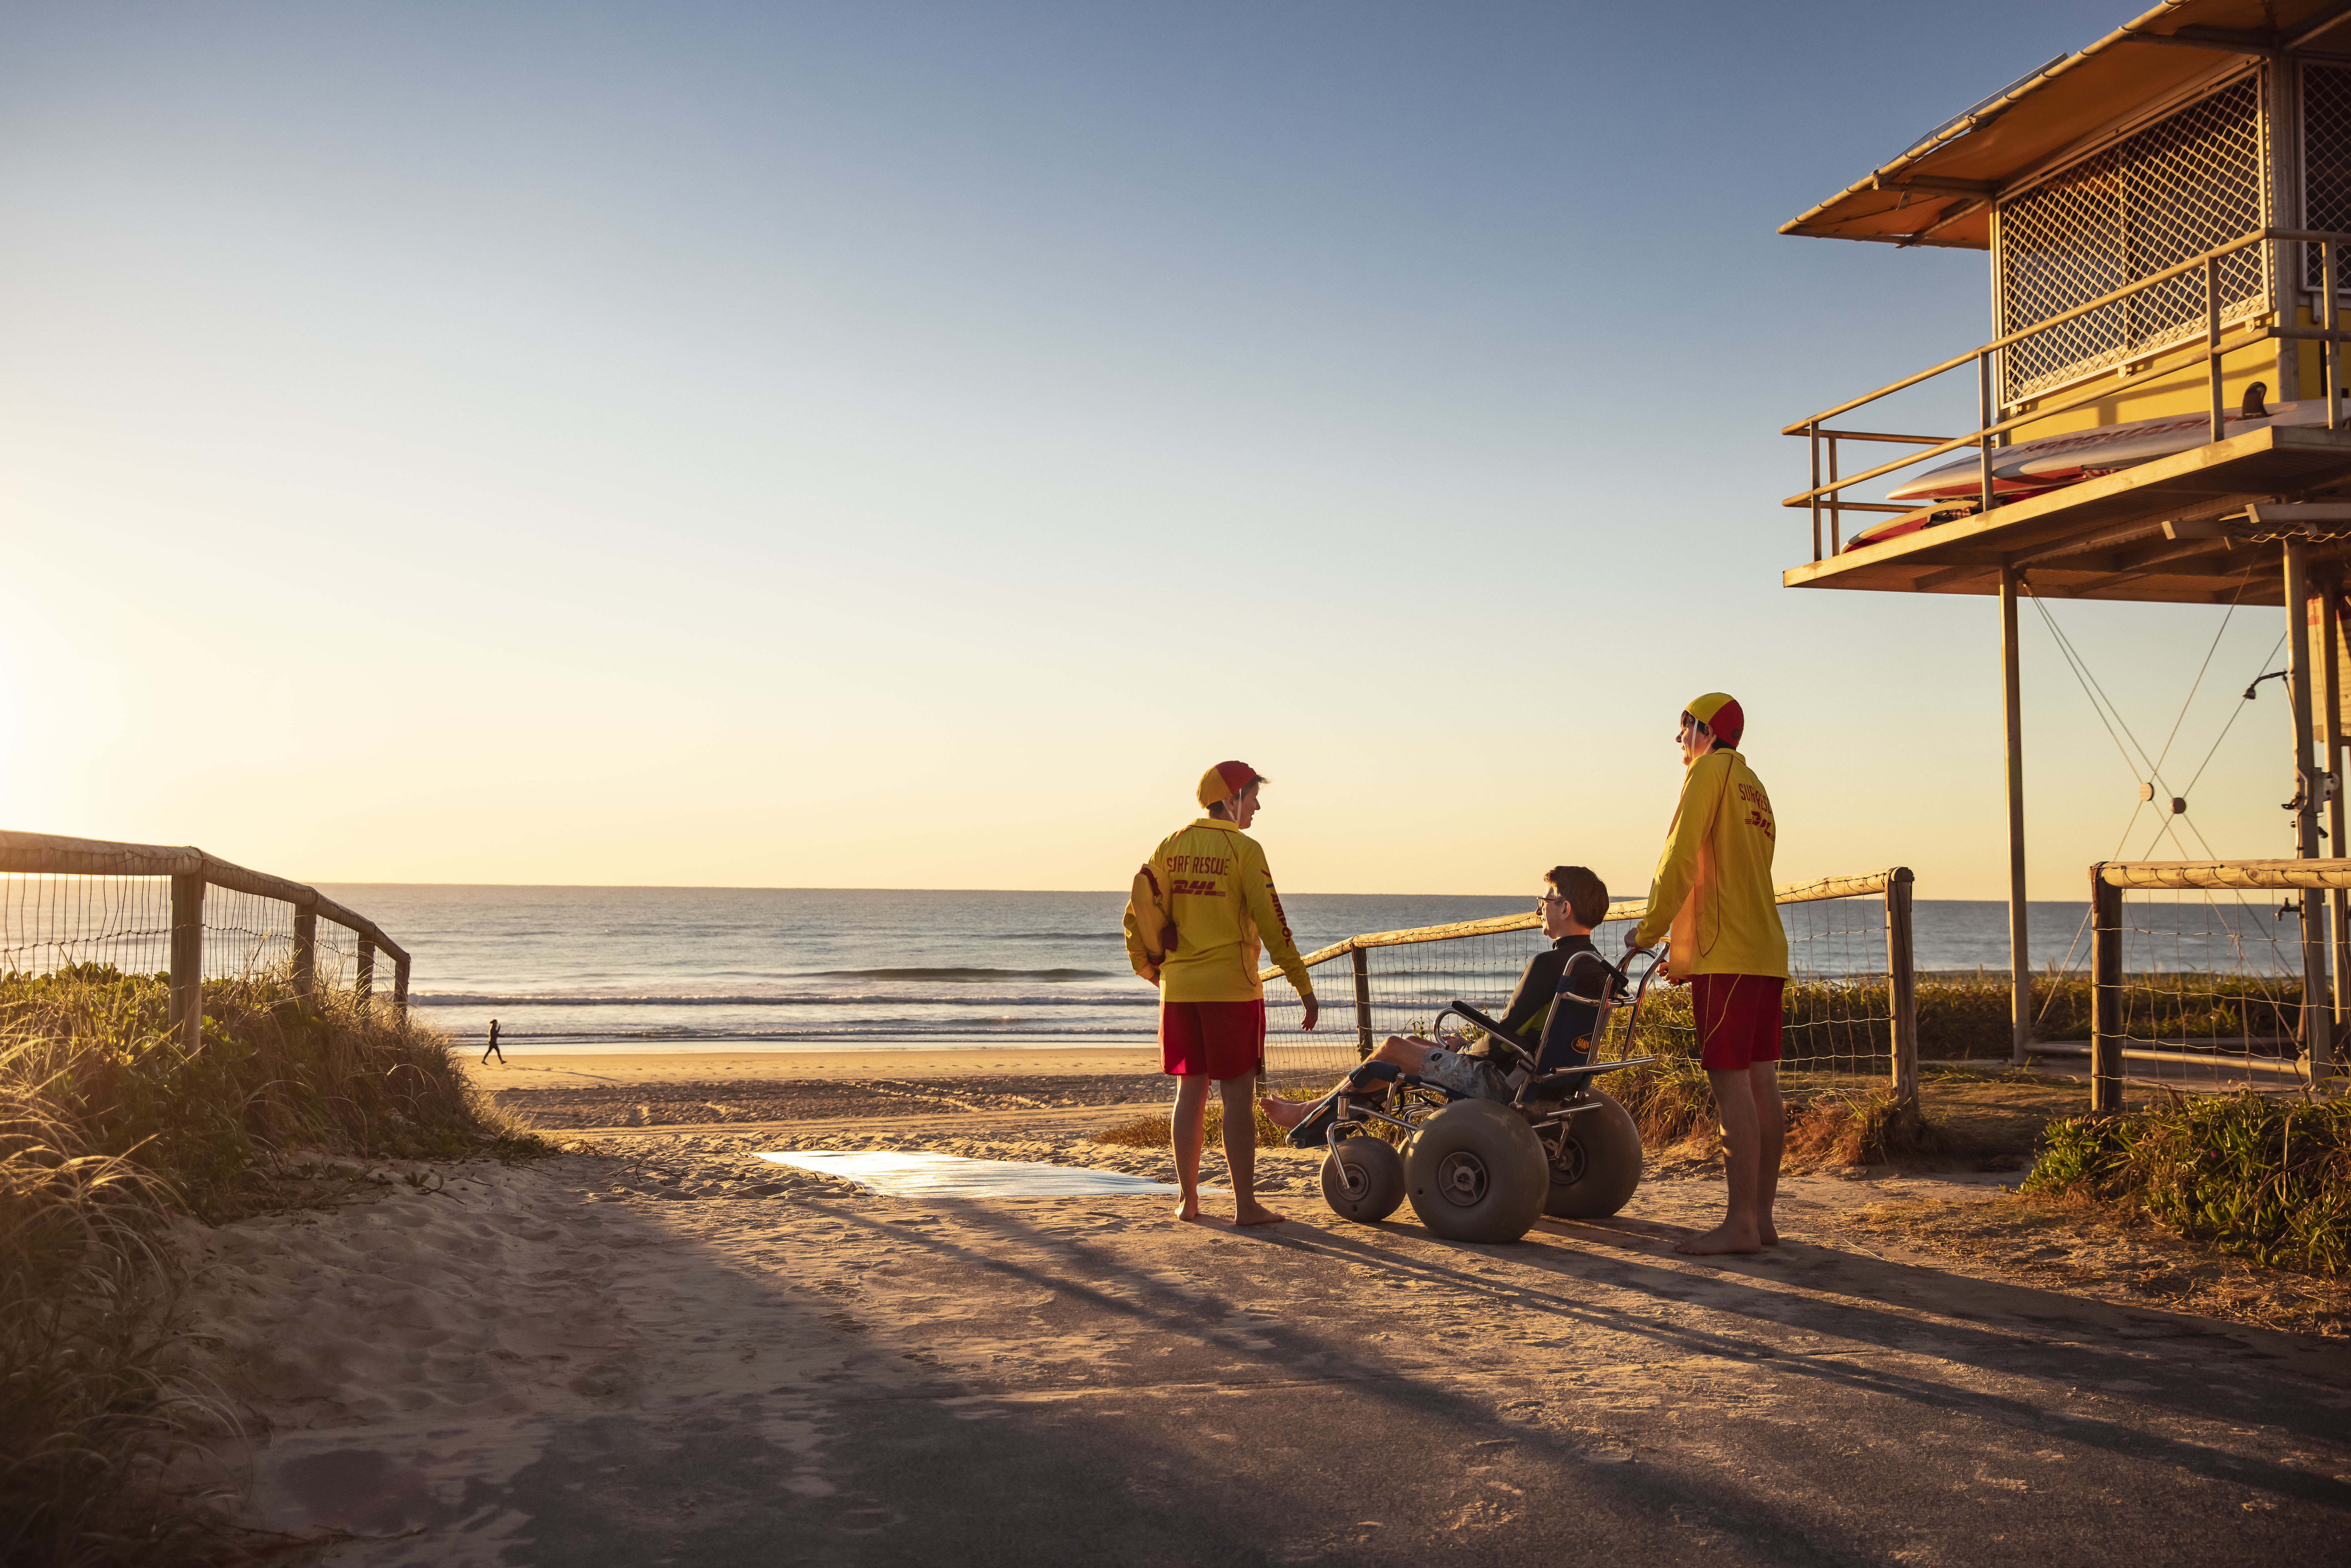 Sunset beach theme with two lifesavers chatting with a man in a beach wheelchair next to the life-saving tower